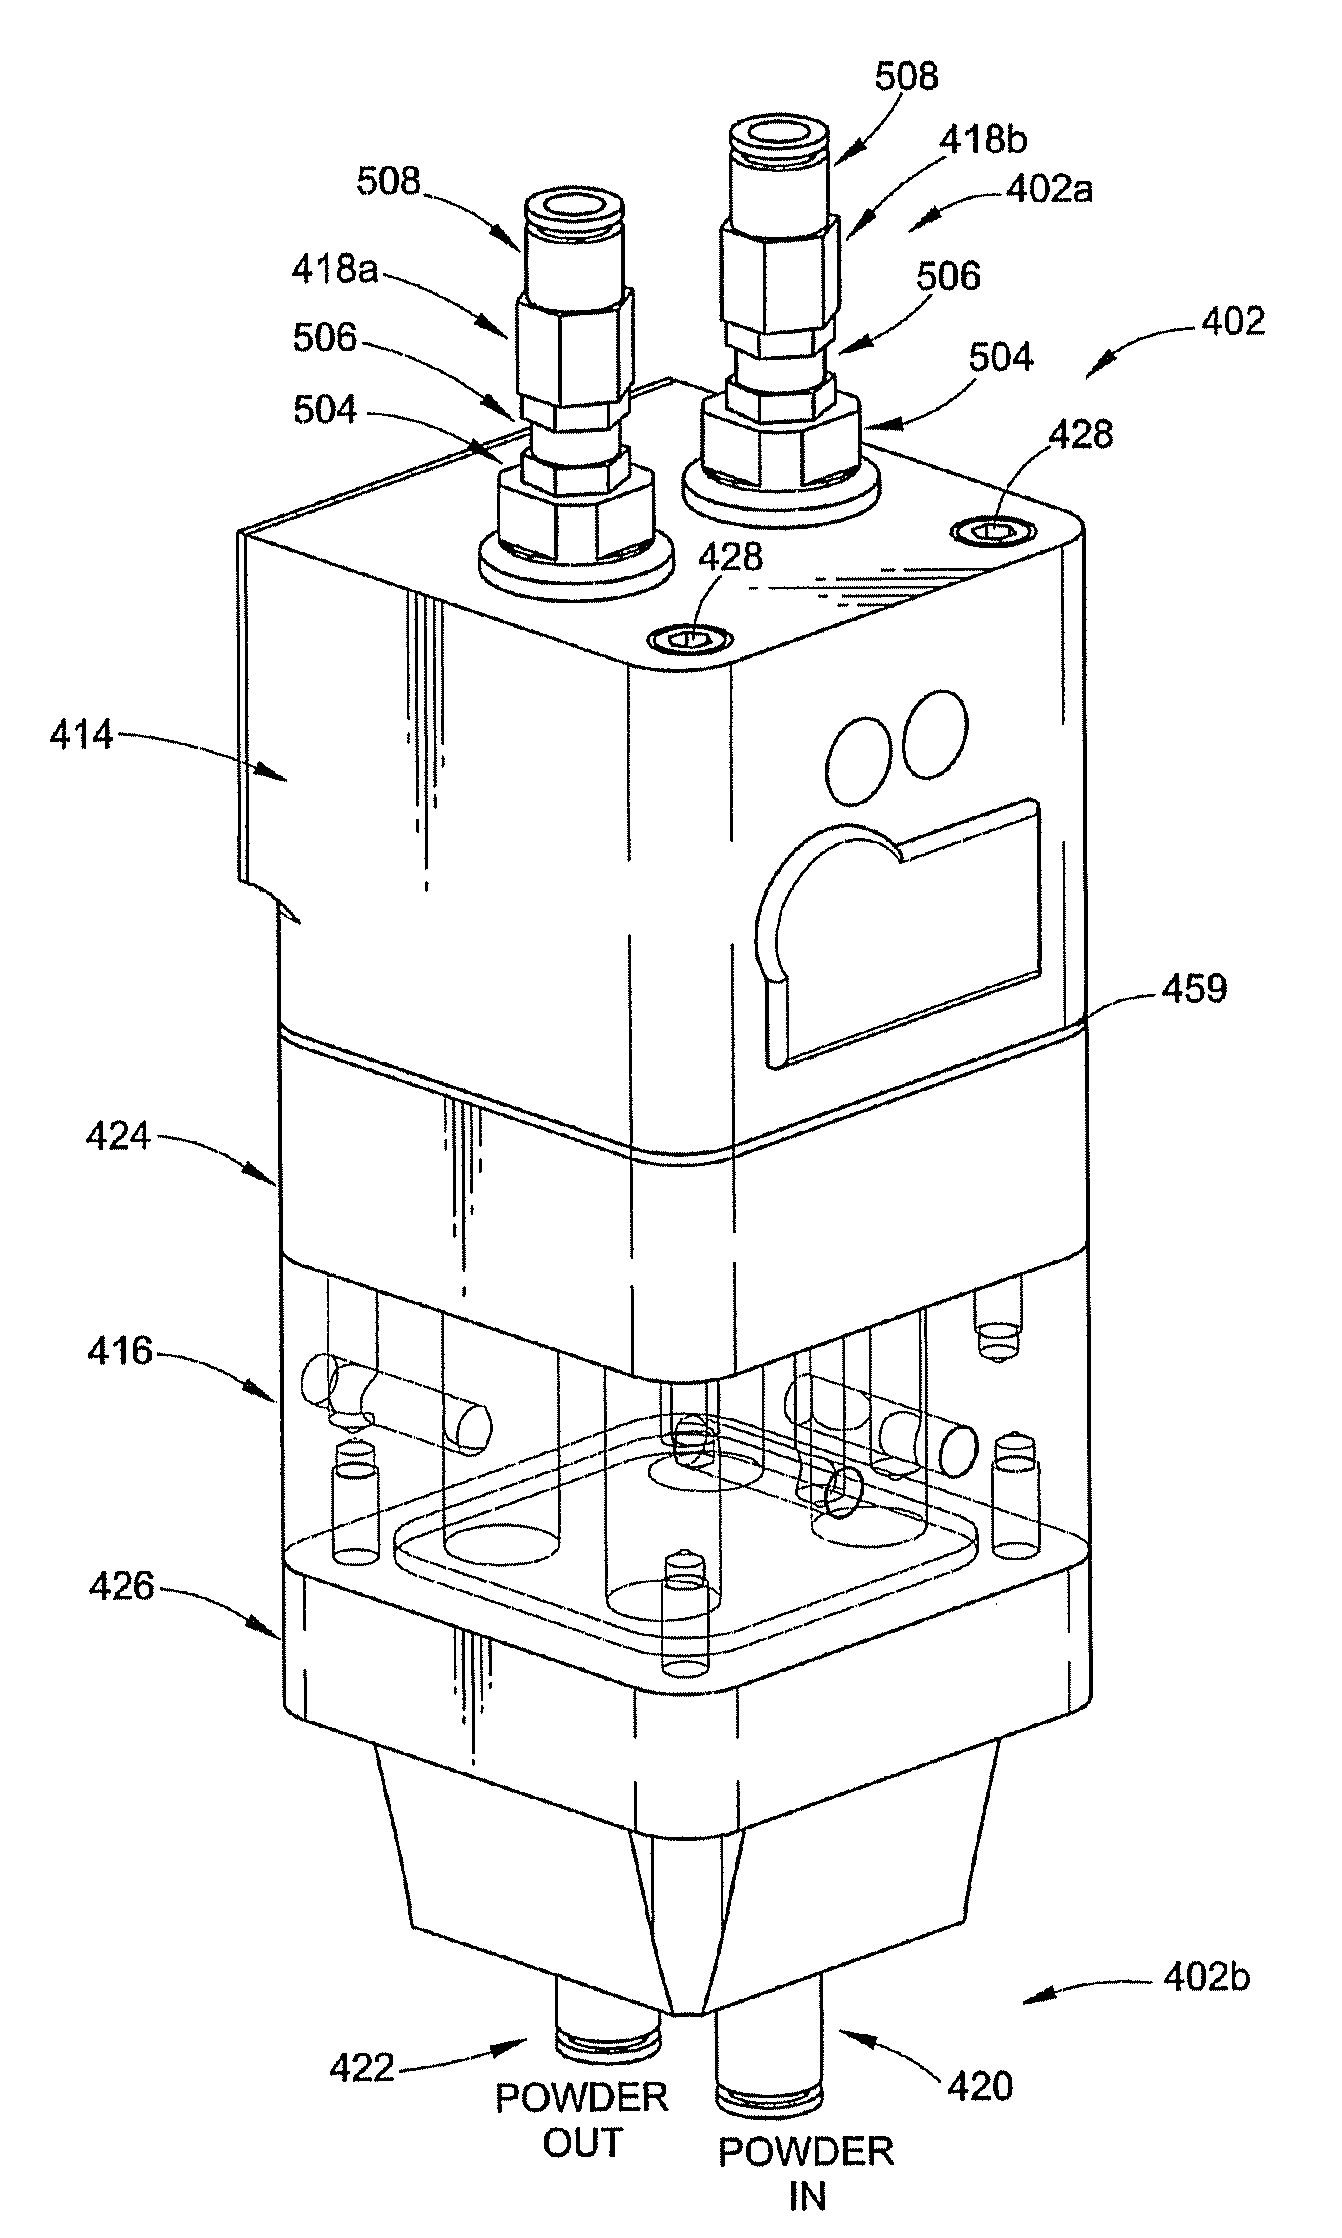 Dense phase pump with single ended flow and purge